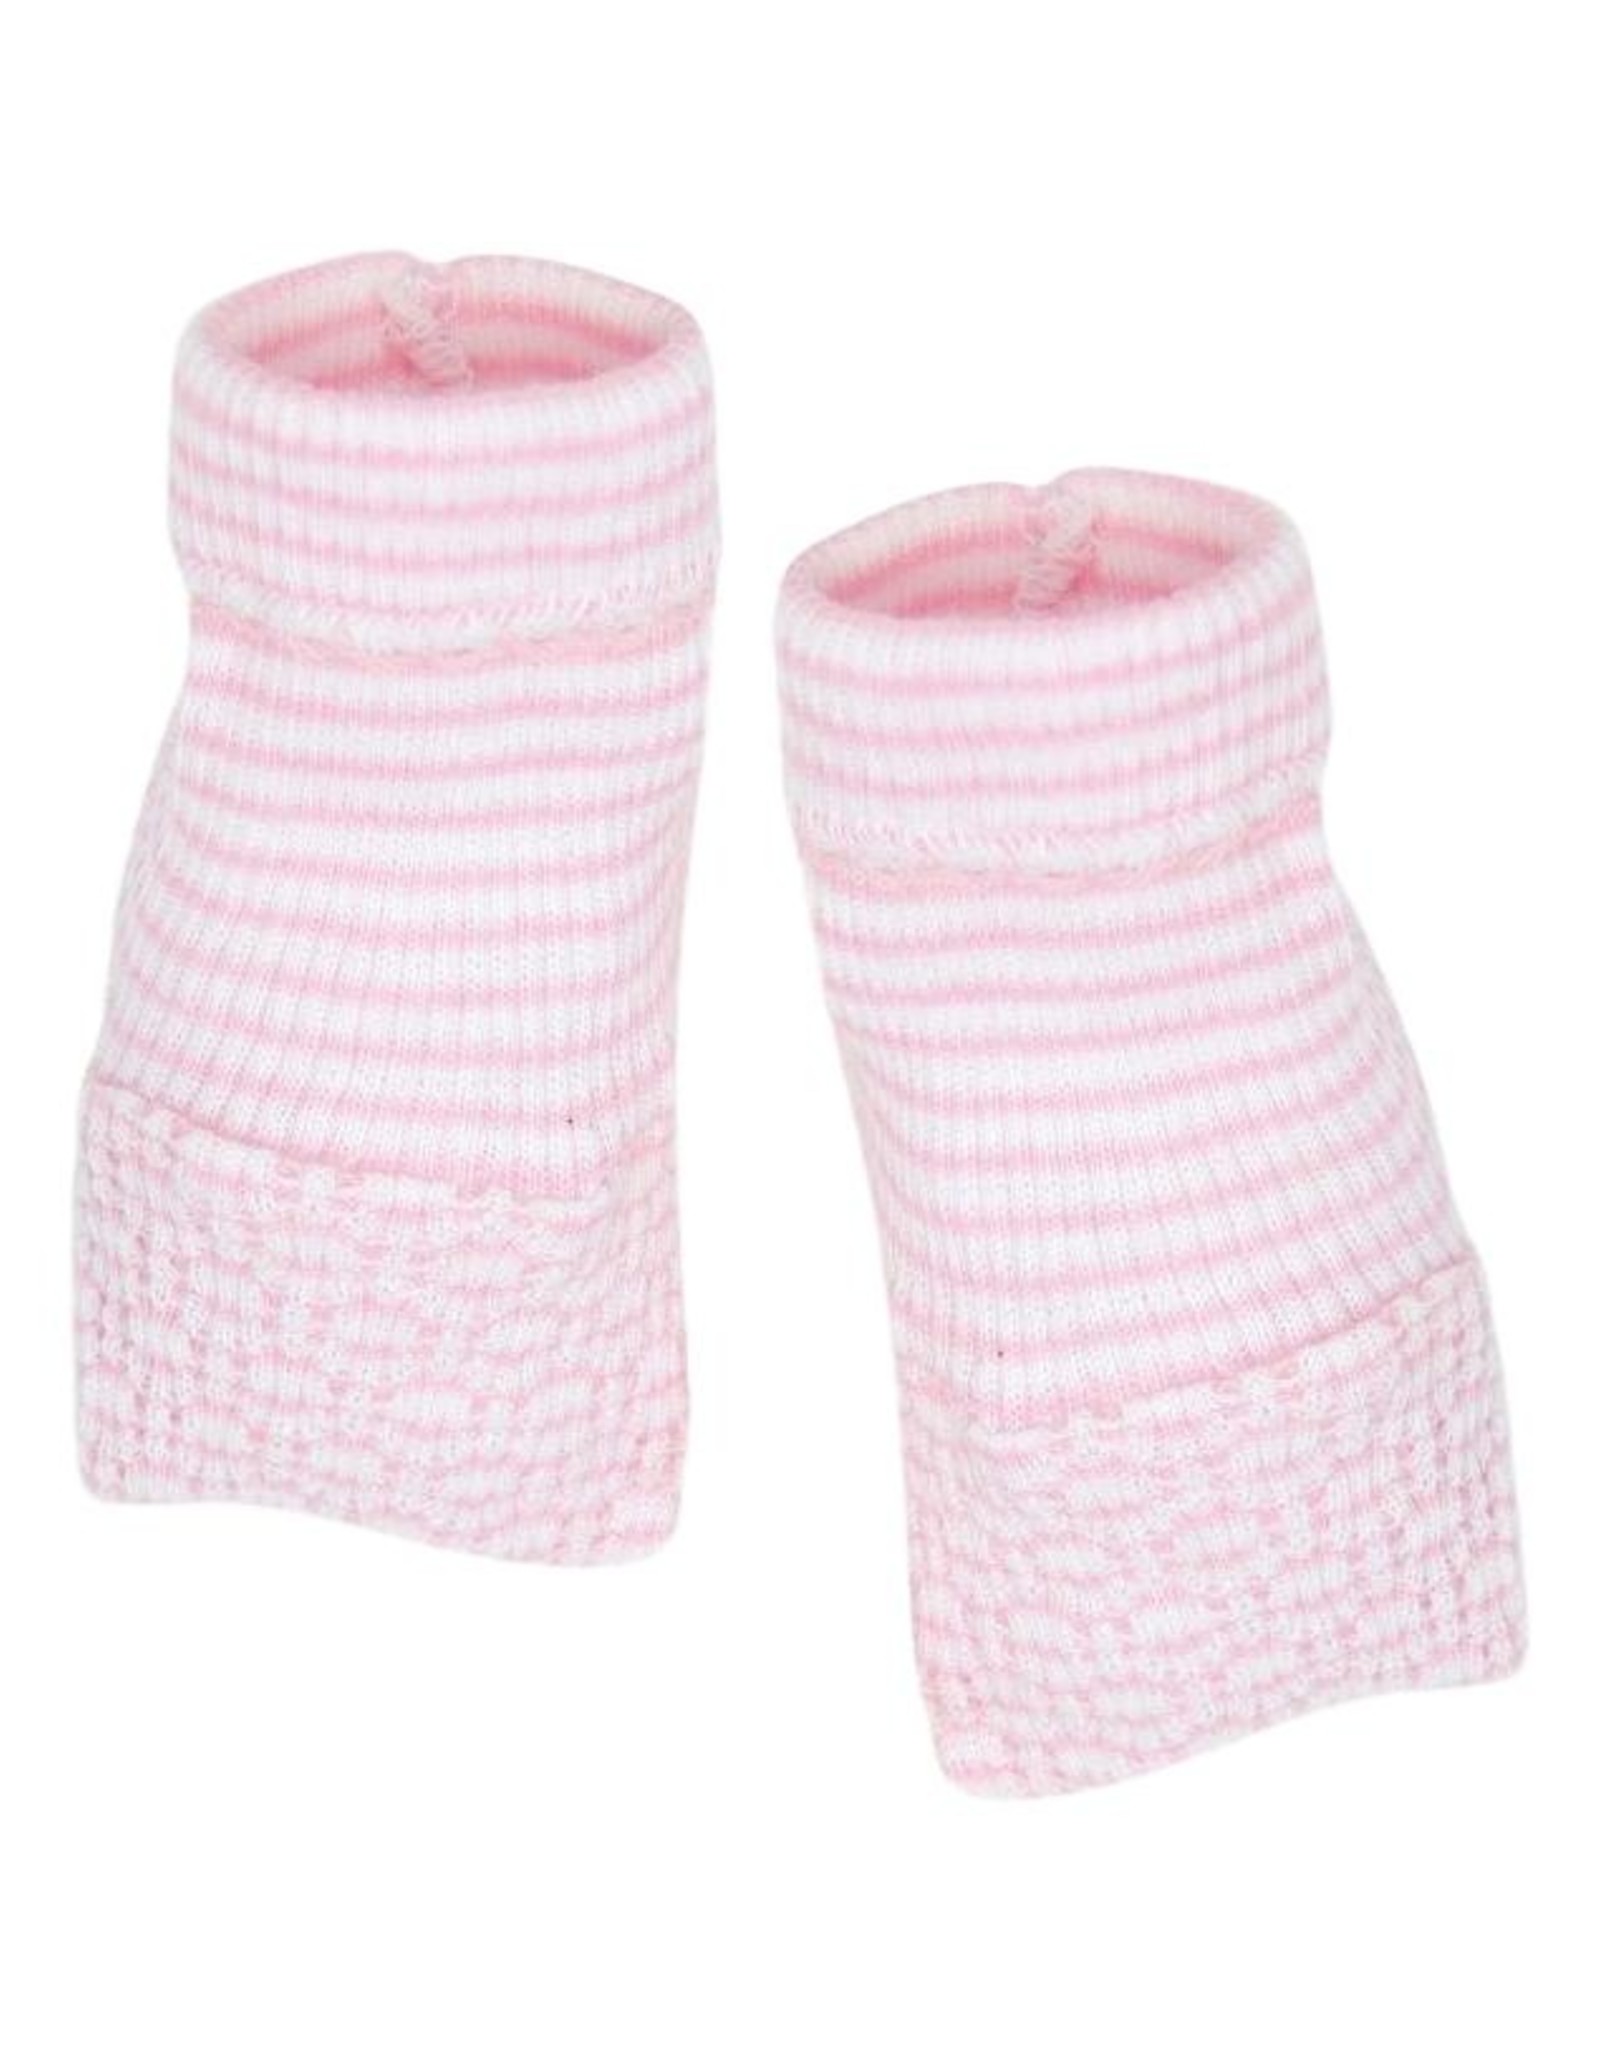 Paty, Inc. 258 Booties Solid Stripe Pink